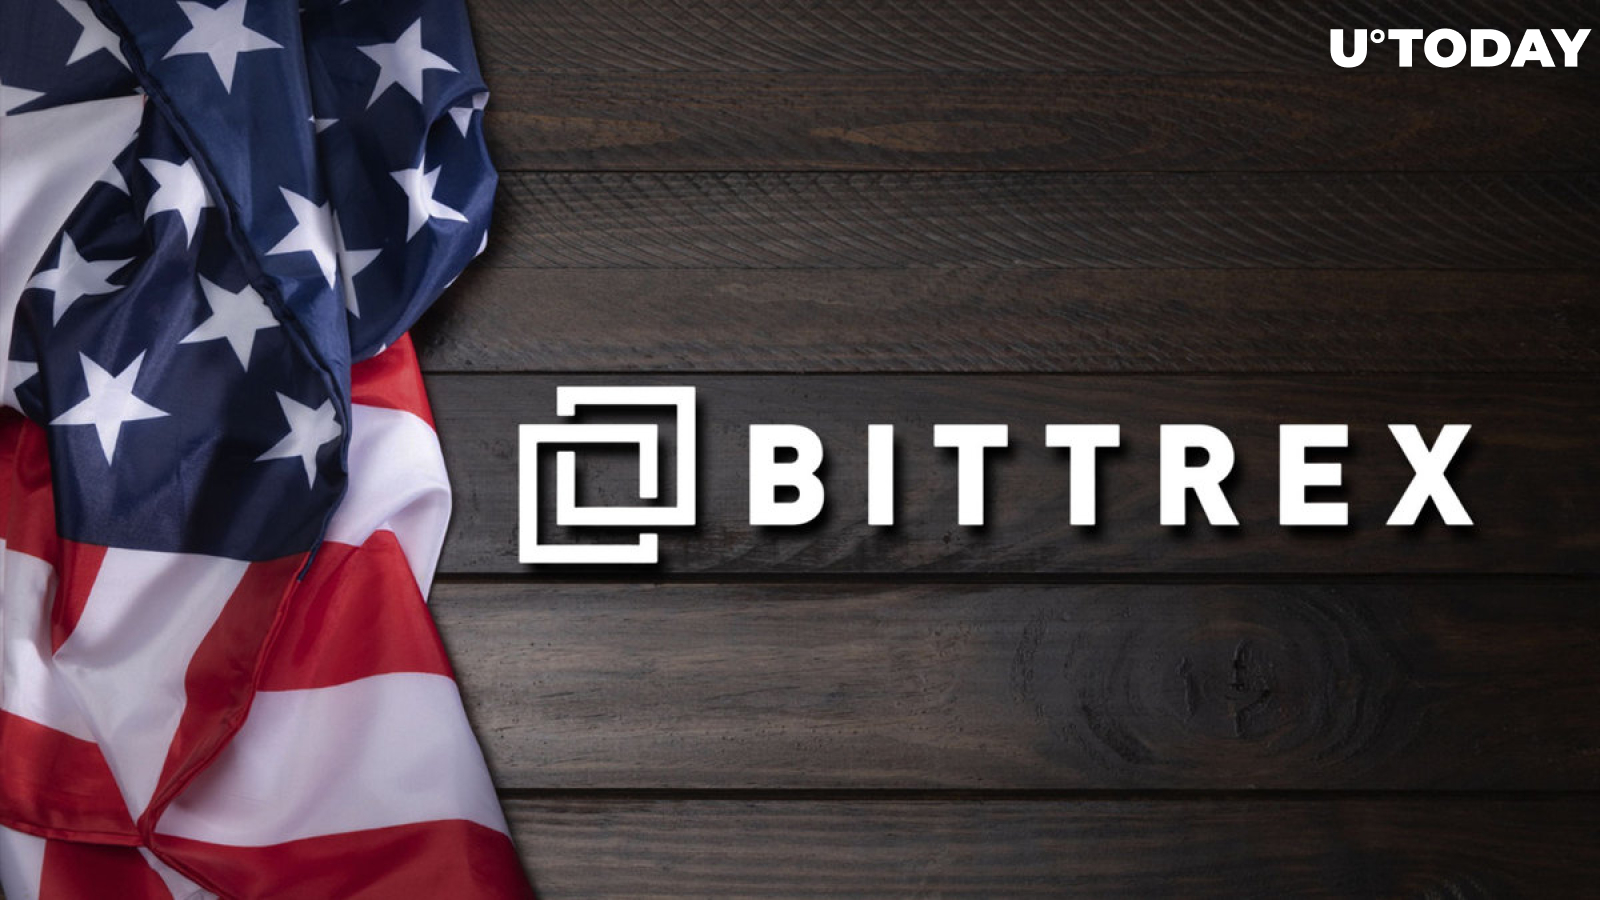 Crypto Community in Awe as Bittrex US Exchange Winds Down